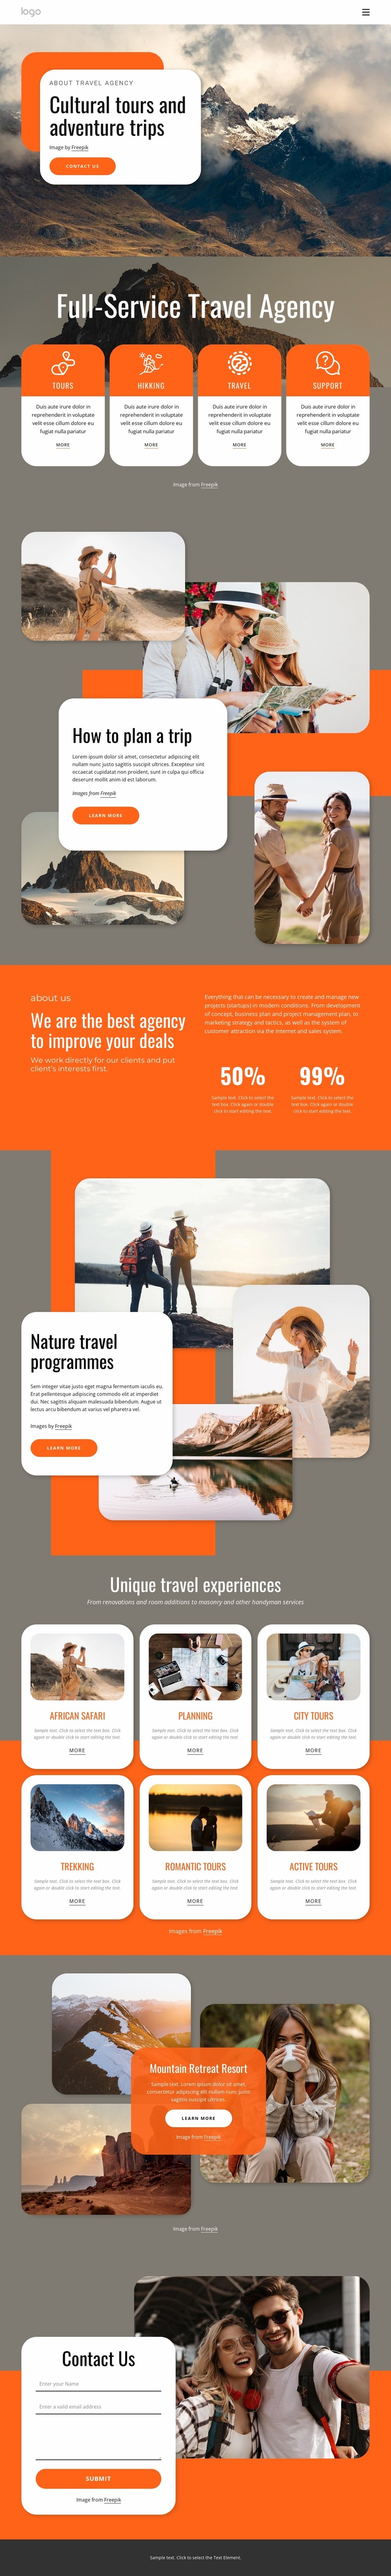 Group travel for all ages Website Design